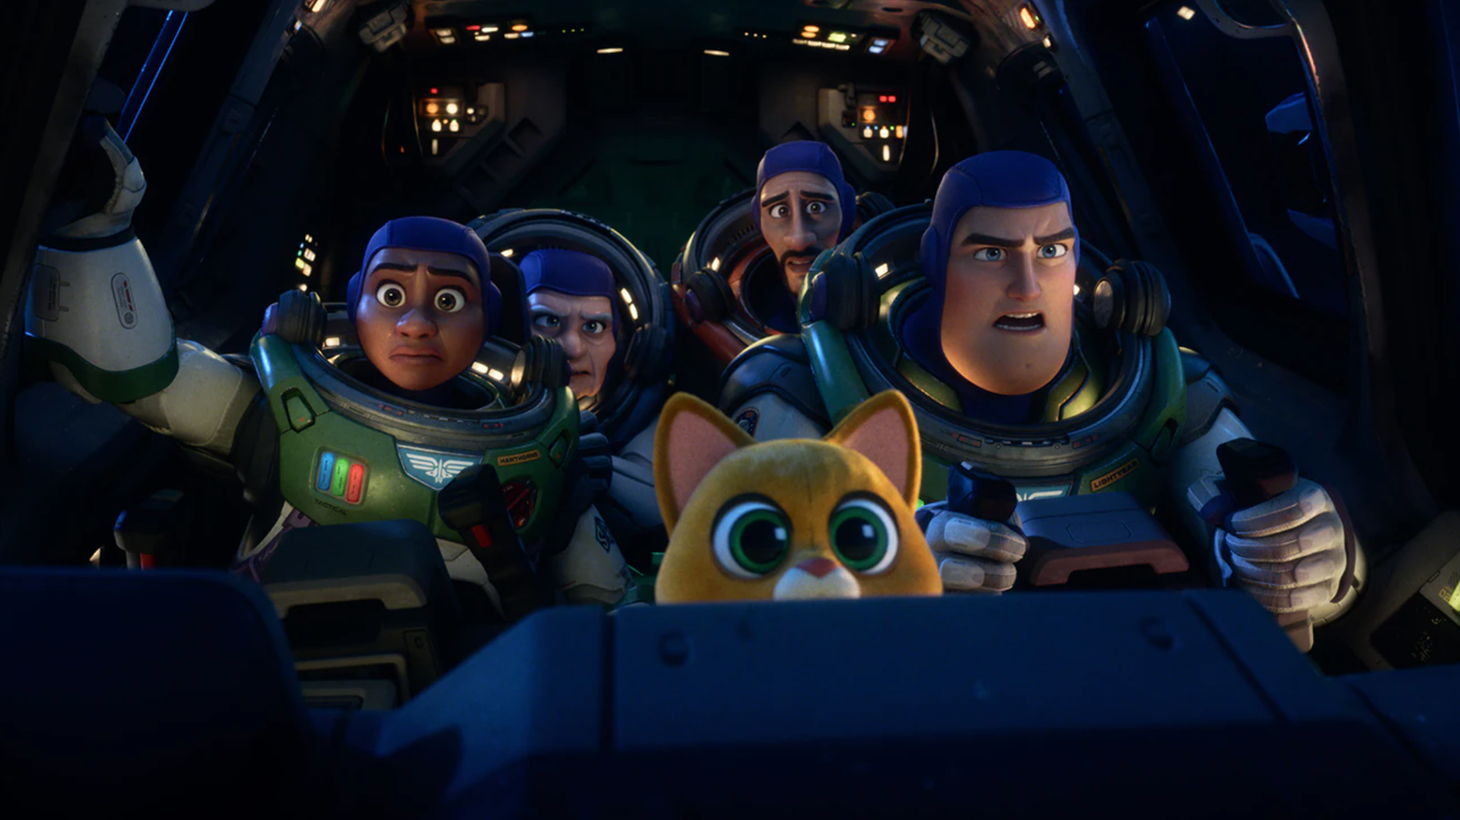 “Lightyear” tells the origin story of Buzz Lightyear, the hero who inspired the toy in the “Toy Story” franchise.